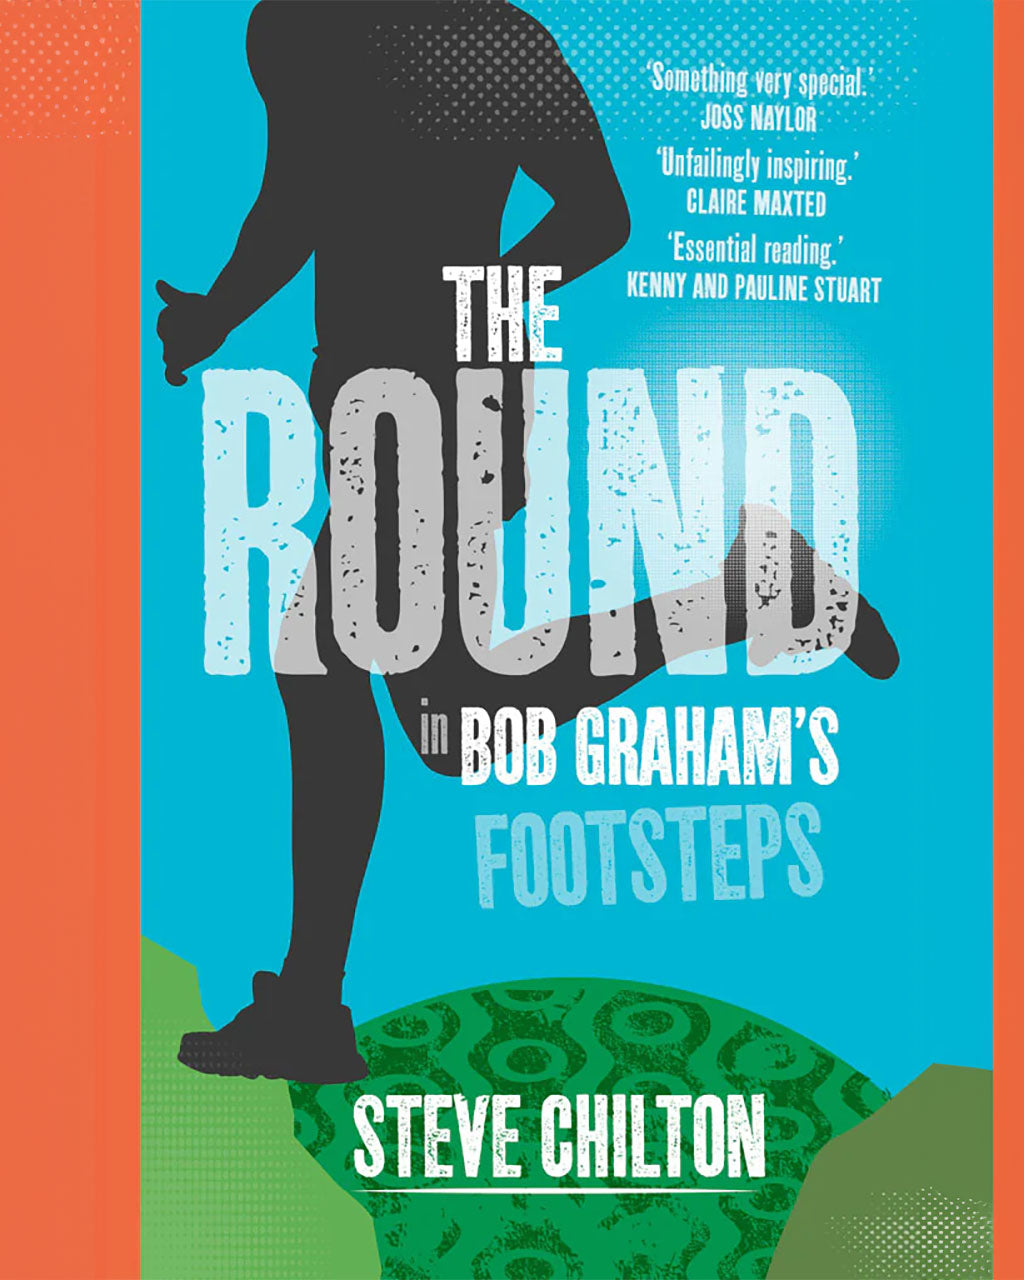 The Round by Steve Chilton